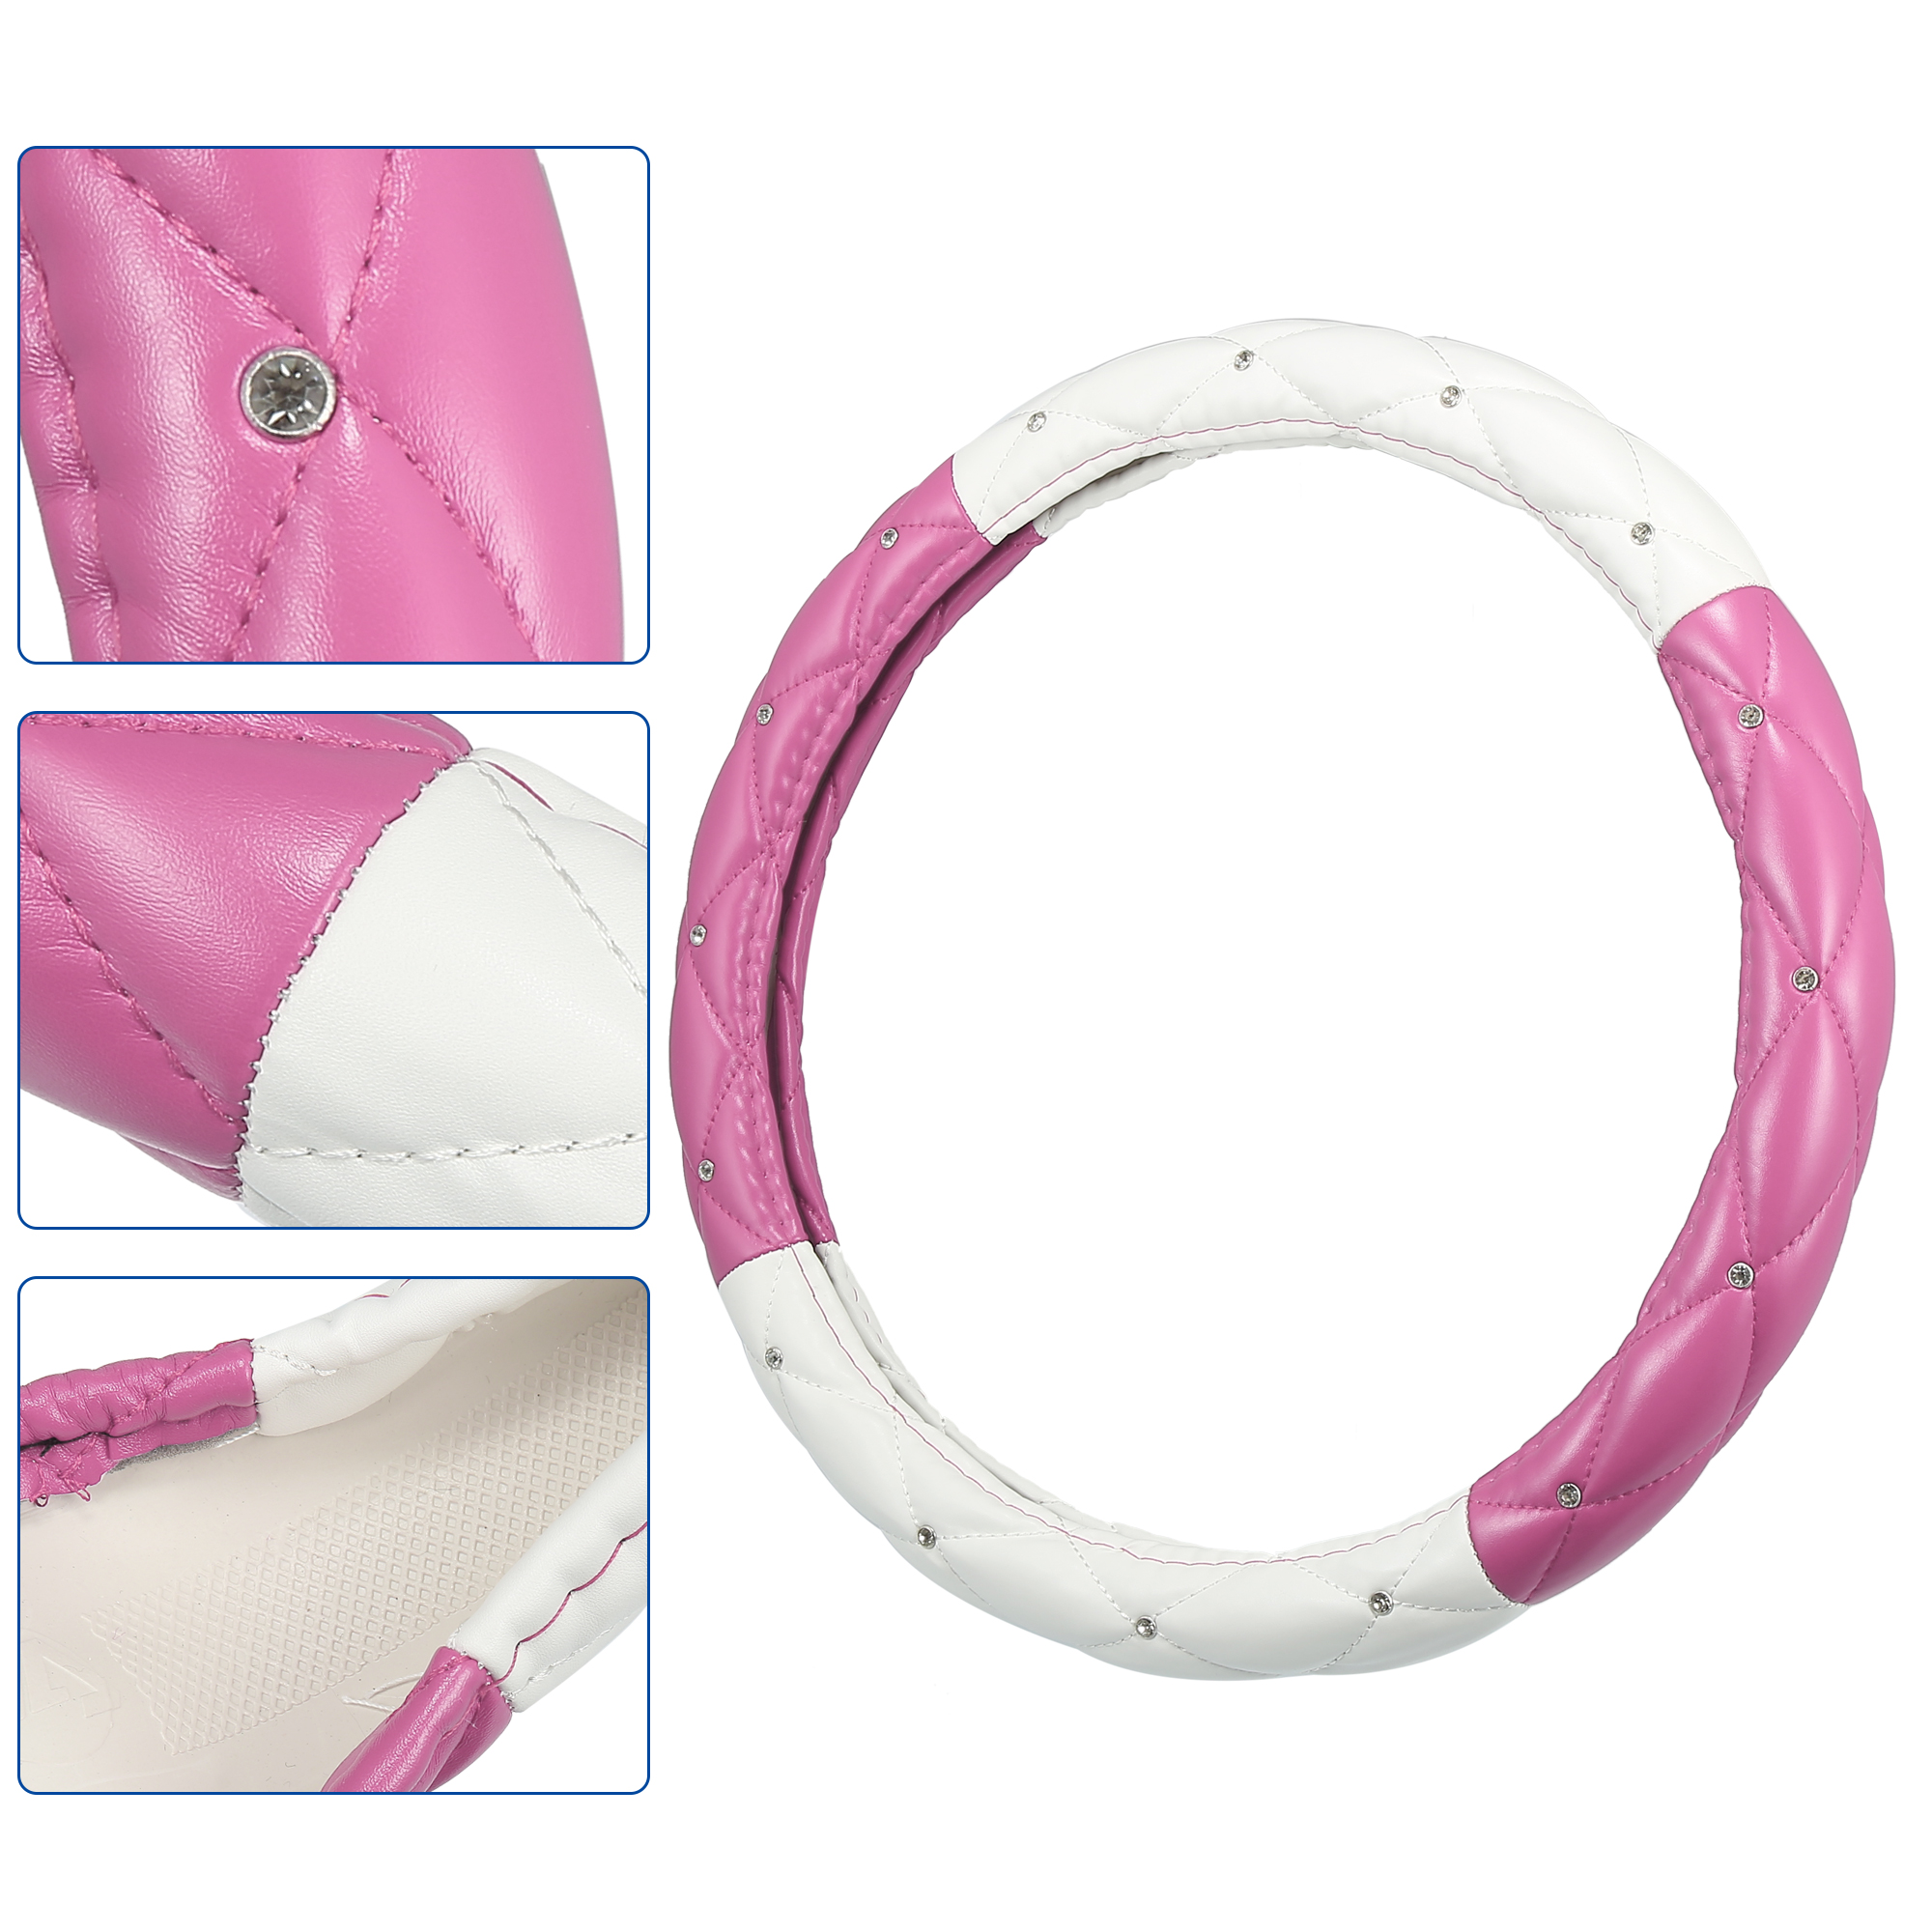 Unique Bargains Universal 38cm Faux Leather Steering Wheel Cover Car Wheel Protector Pink White